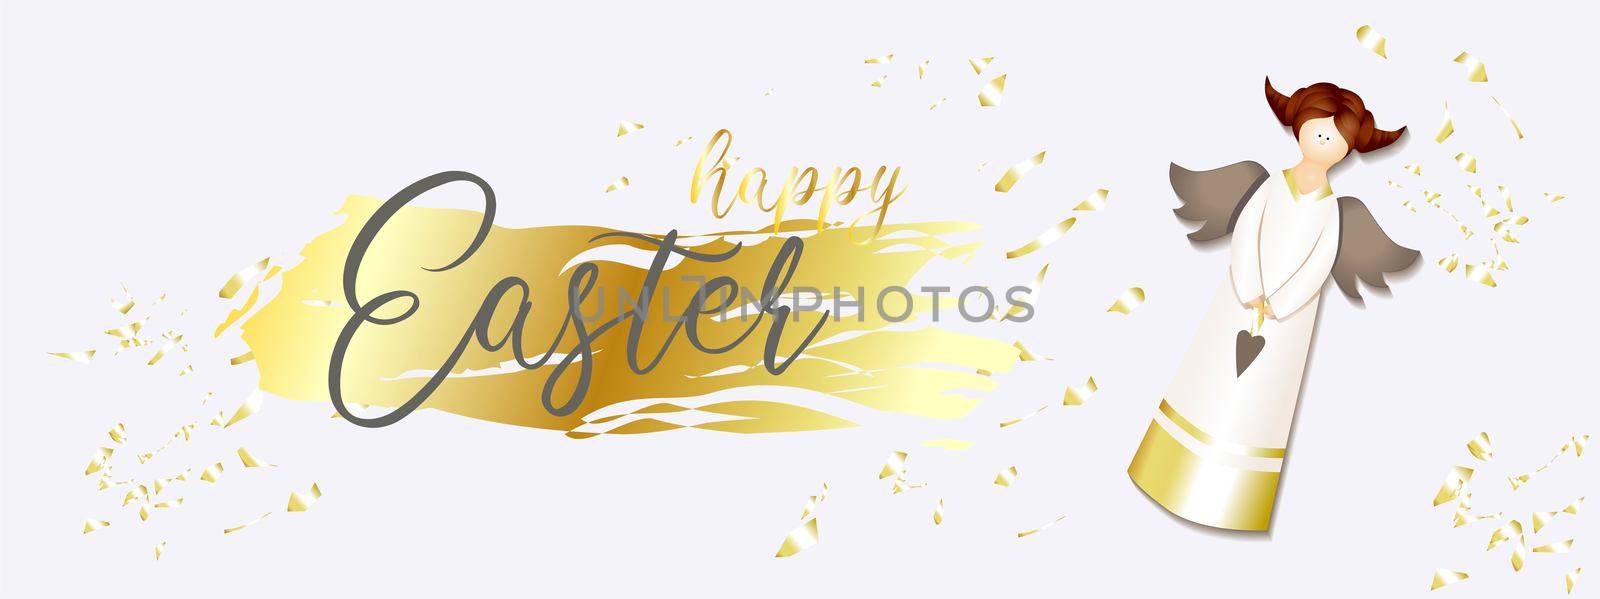 Easter banner. Horizontal poster, postcard, website headers, background with text happy easter. Angel on a light background. elegant. Gold brush stroke. Design with realistic objects.